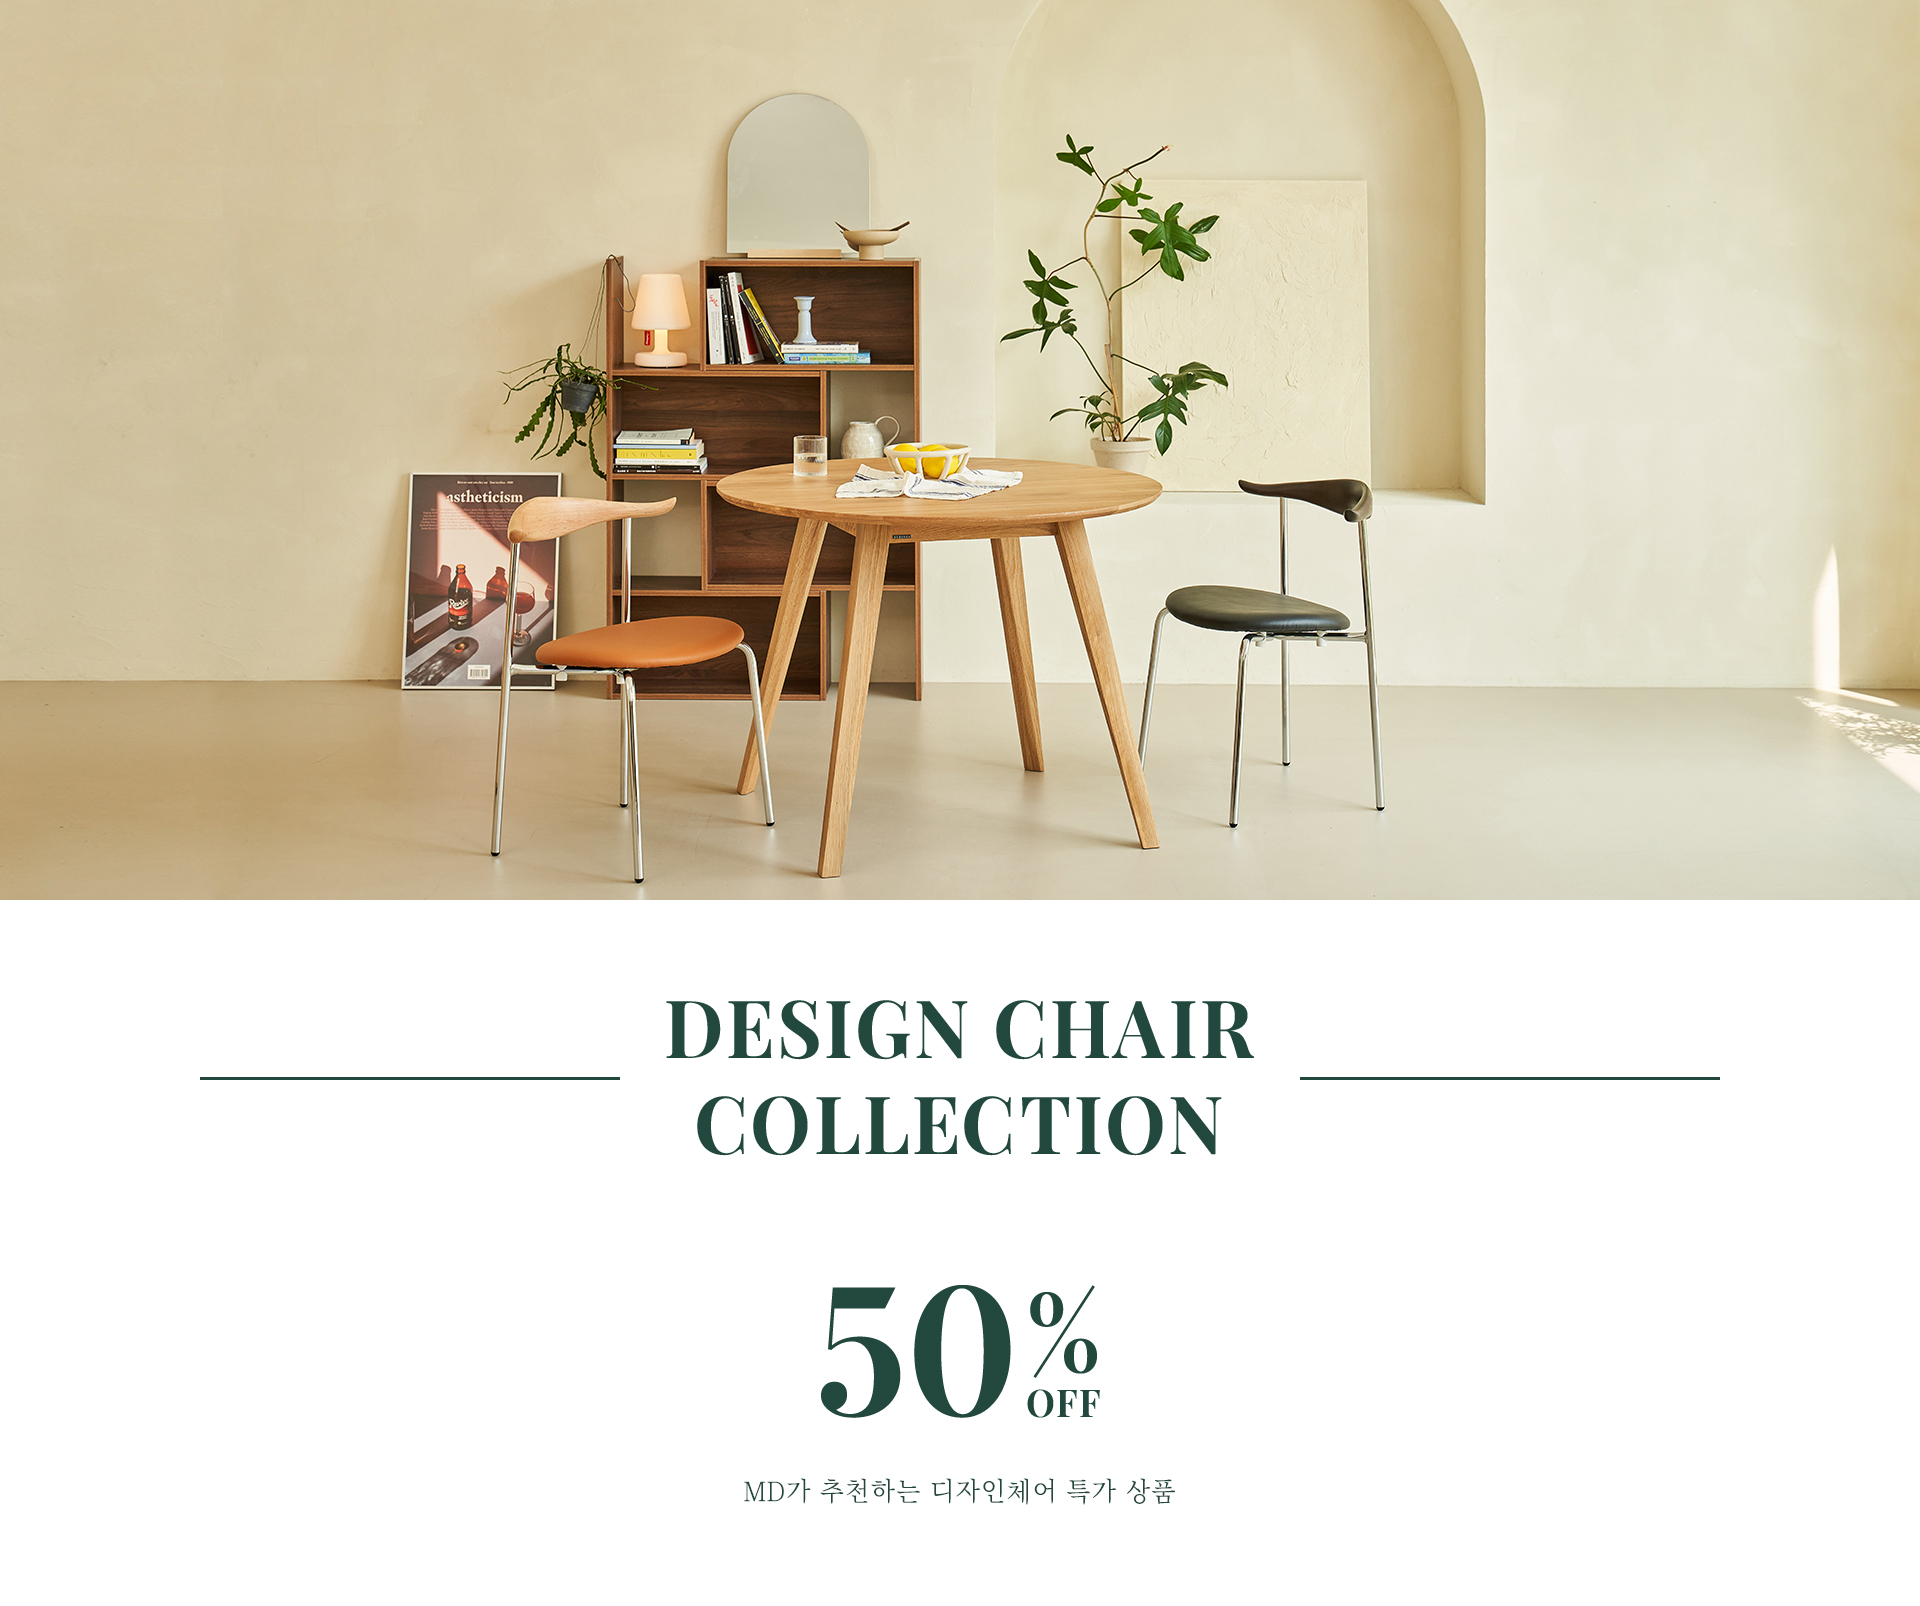 DESIGN CHAIR COLLECTION 50% off